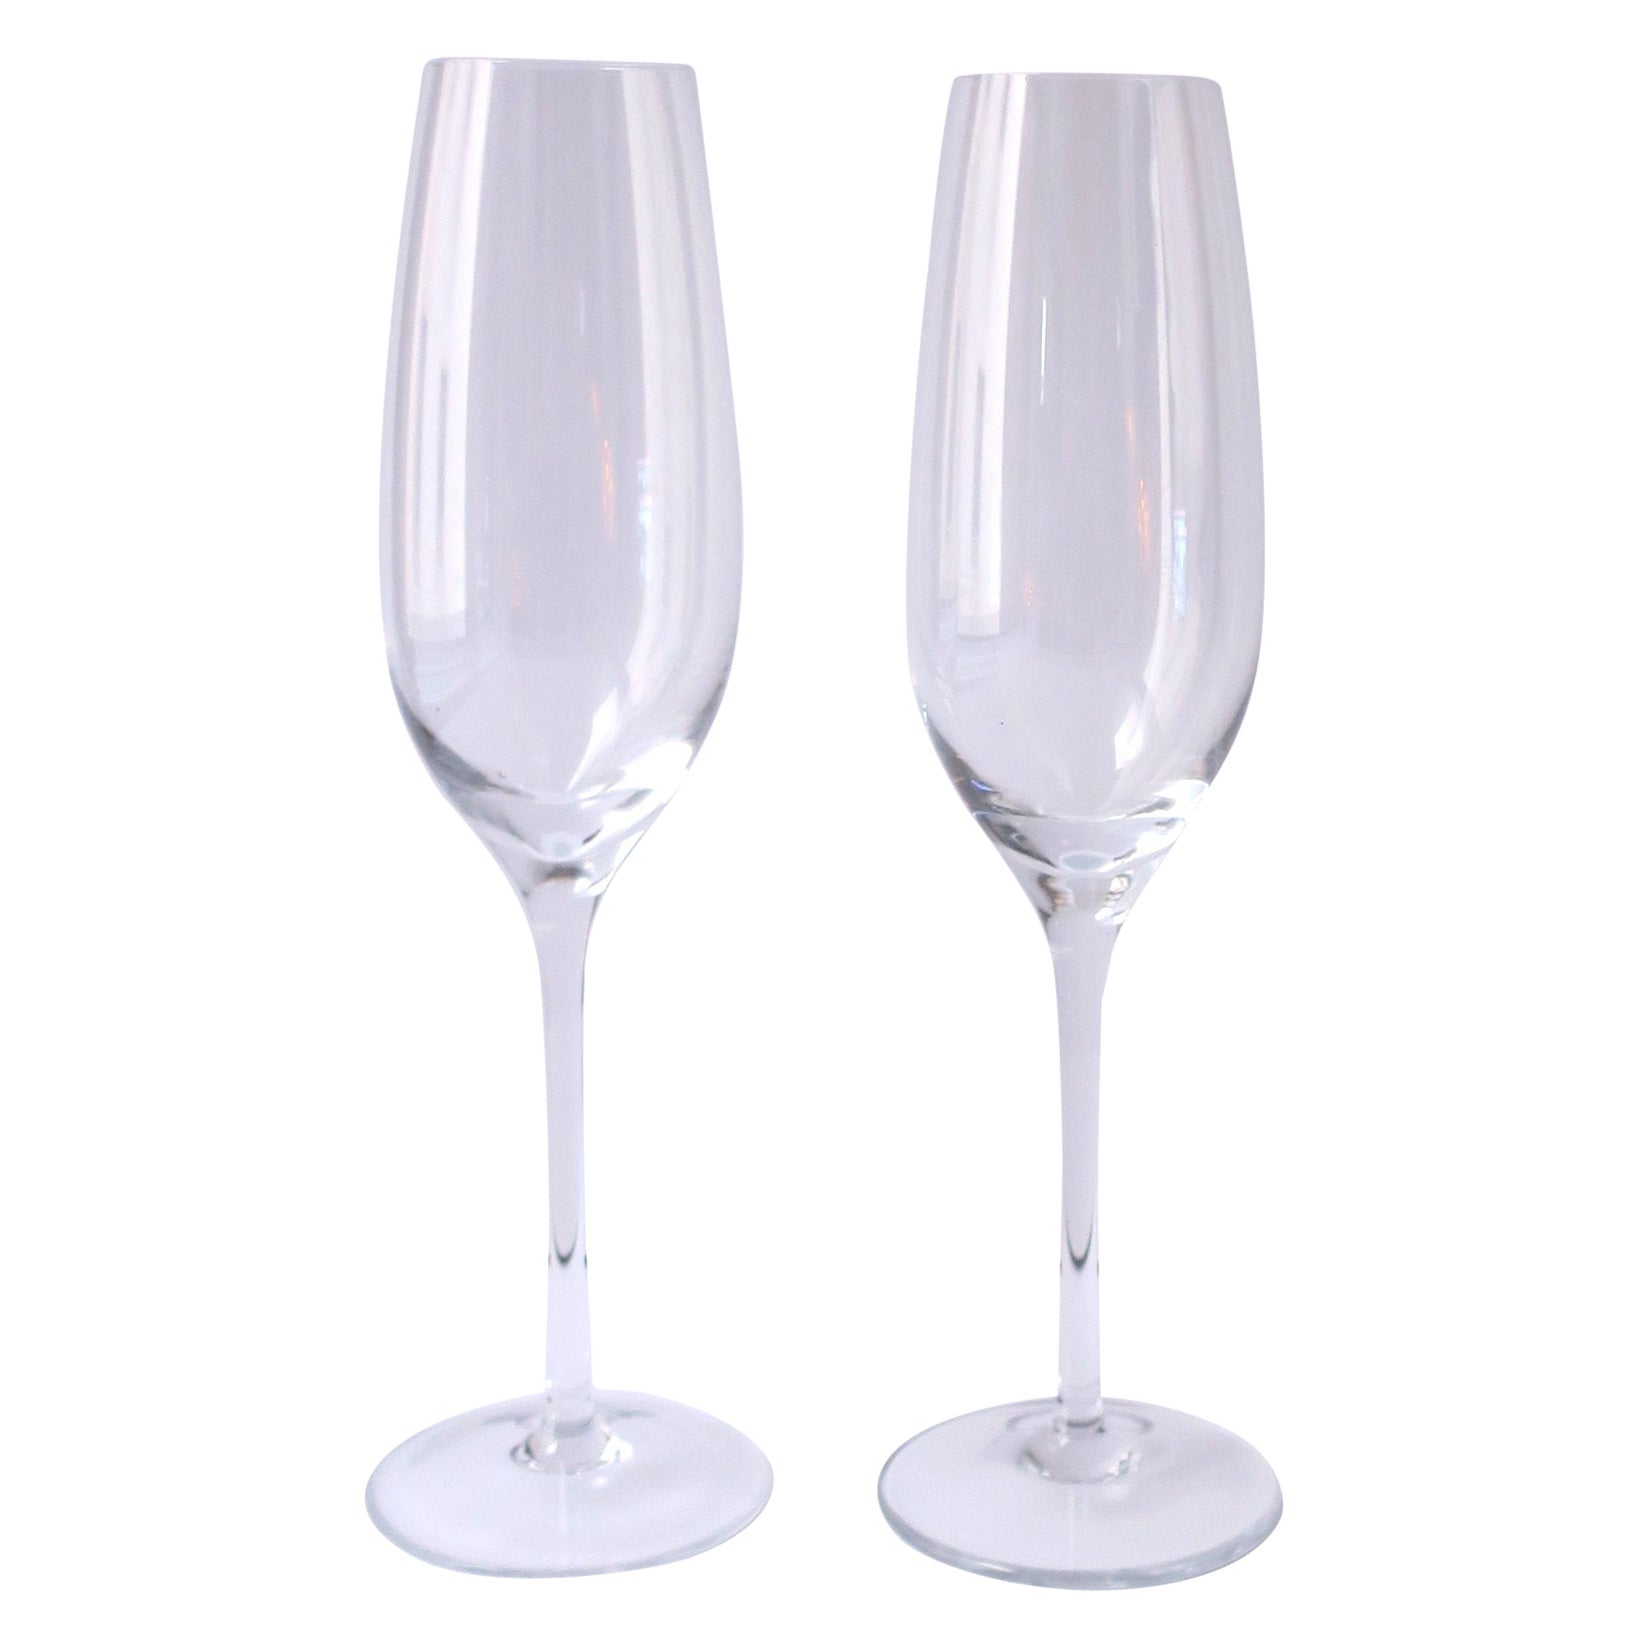 Tiffany & Co Crystal Champagne Flutes Glasses, Pair